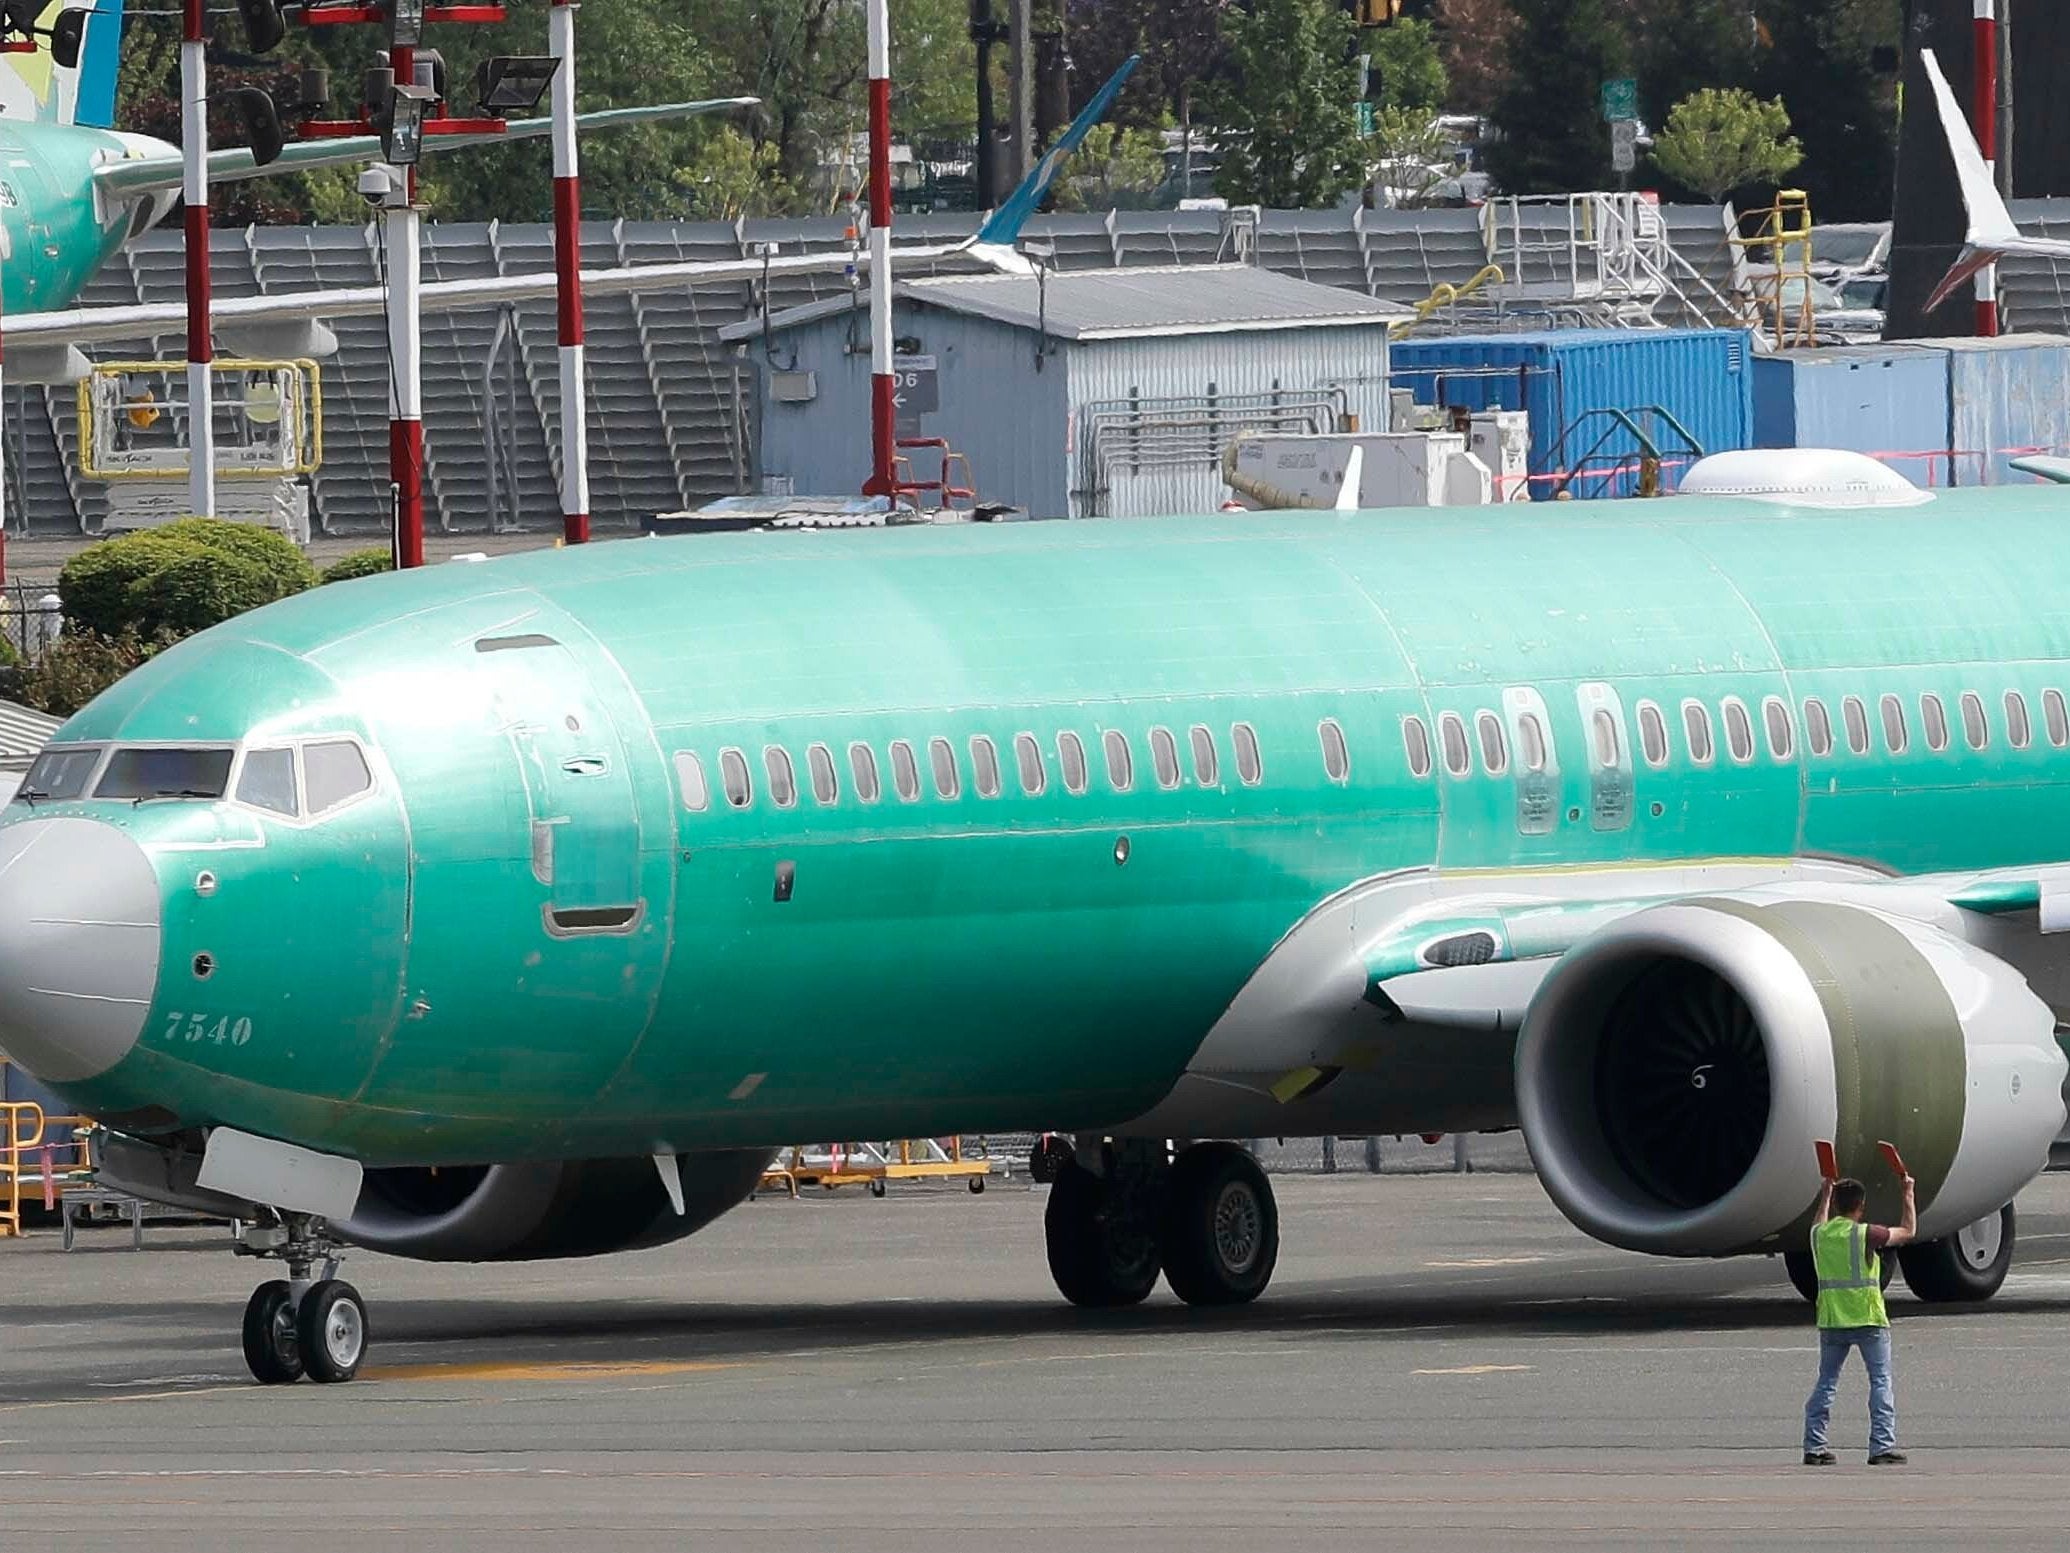 A worker stands near a Boeing 737 MAX 8 jetliner being built for American Airlines prior to a test flight, Wednesday, May 8, 2019, in Renton, Wash. Passenger flights using the plane remain grounded worldwide as investigations into two fatal crashes involving the airplane continue.